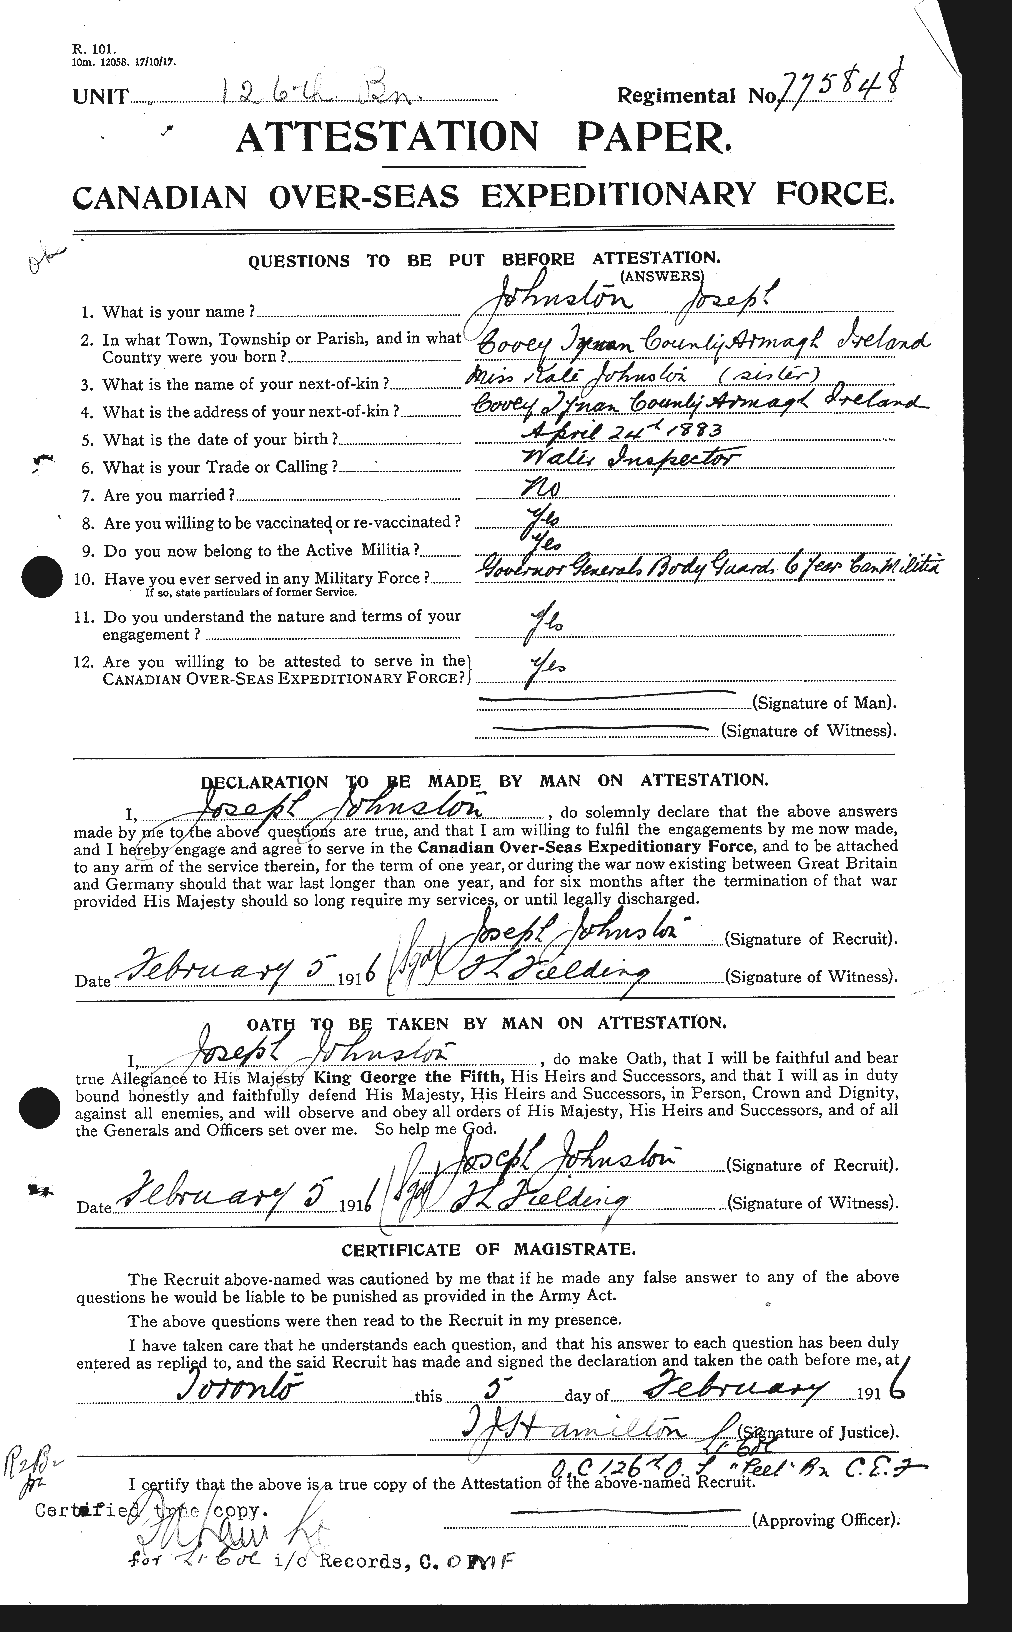 Personnel Records of the First World War - CEF 422889a